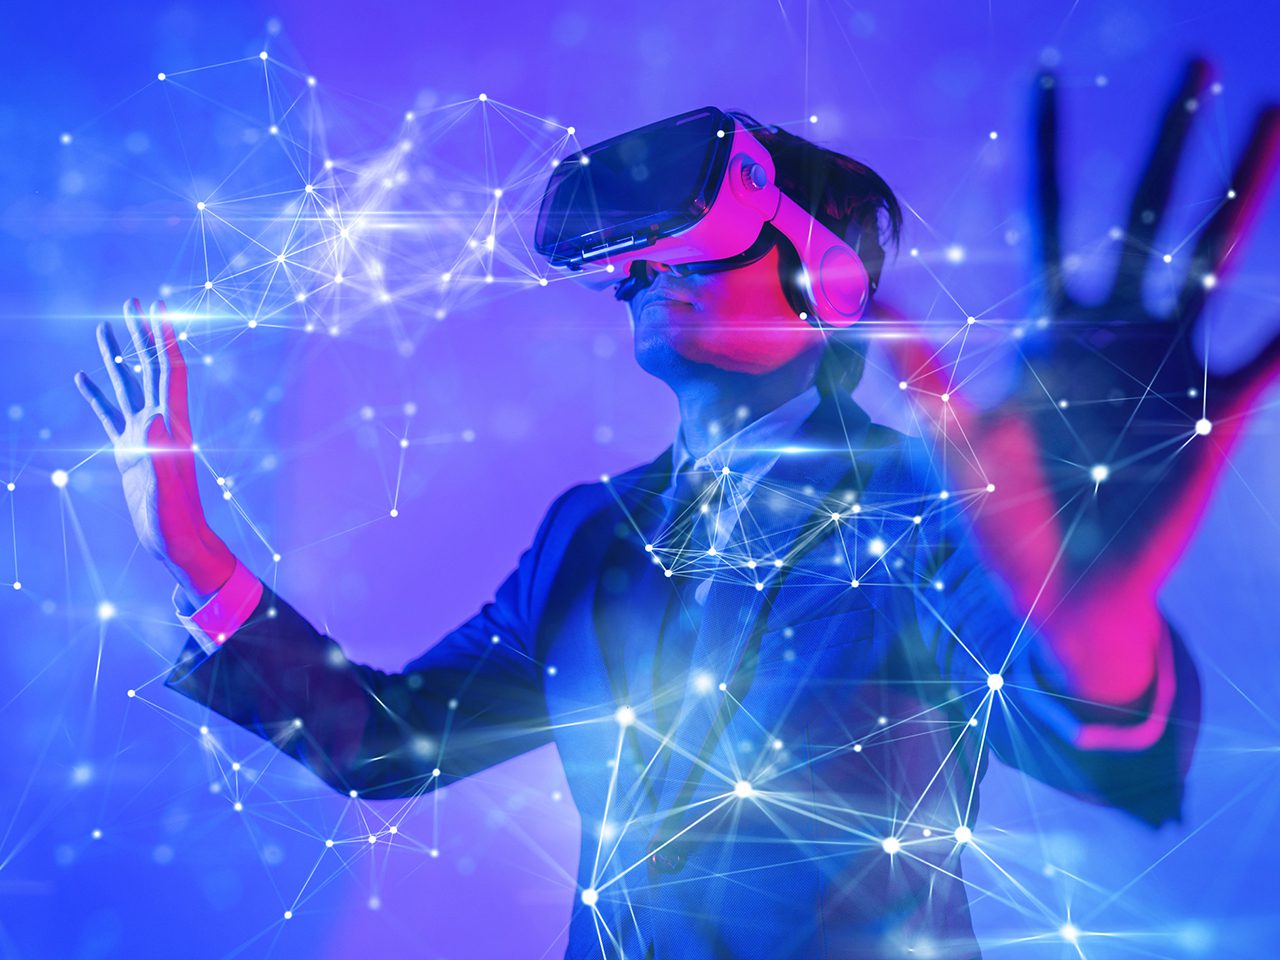 Metaverse digital world technology, man wearing VR glasses playing augmented reality augmented reality game and entertainment, futuristic lifestyle